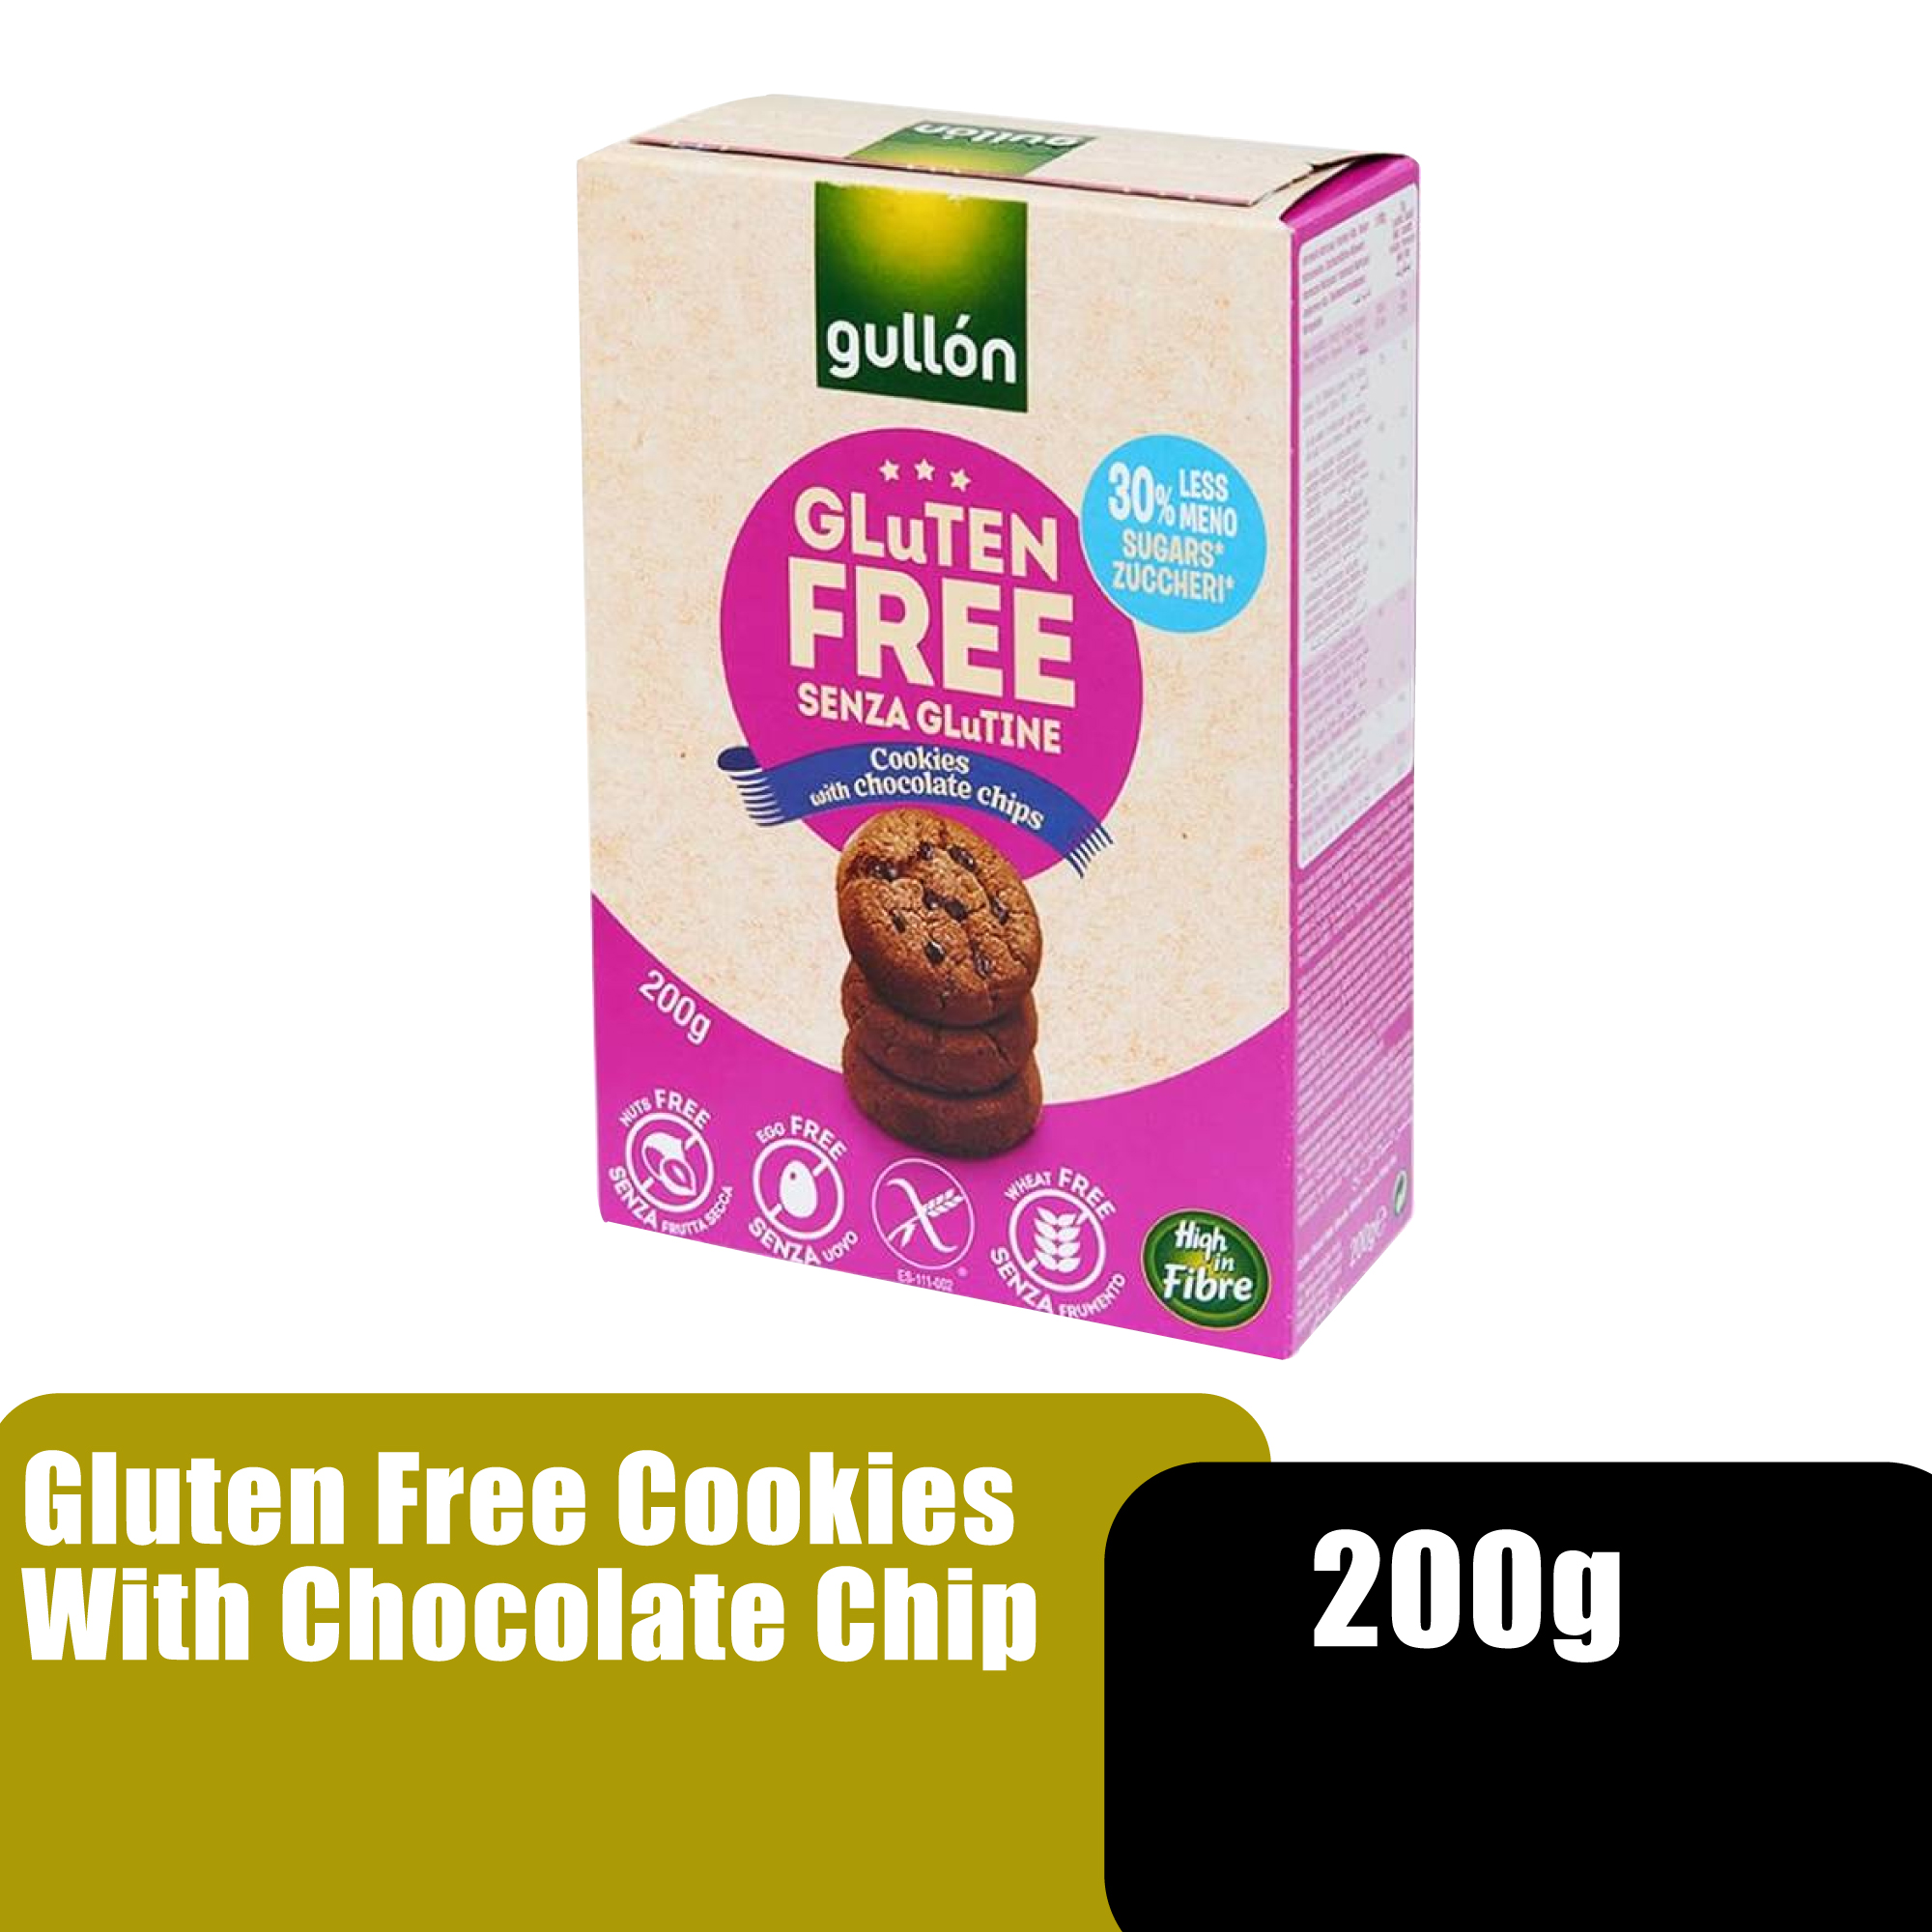 GULLON Gluten Free Cookies with Chocolate Chips 200g Healthy Snacks Biskut ( 低卡零食 / 健康零食 )